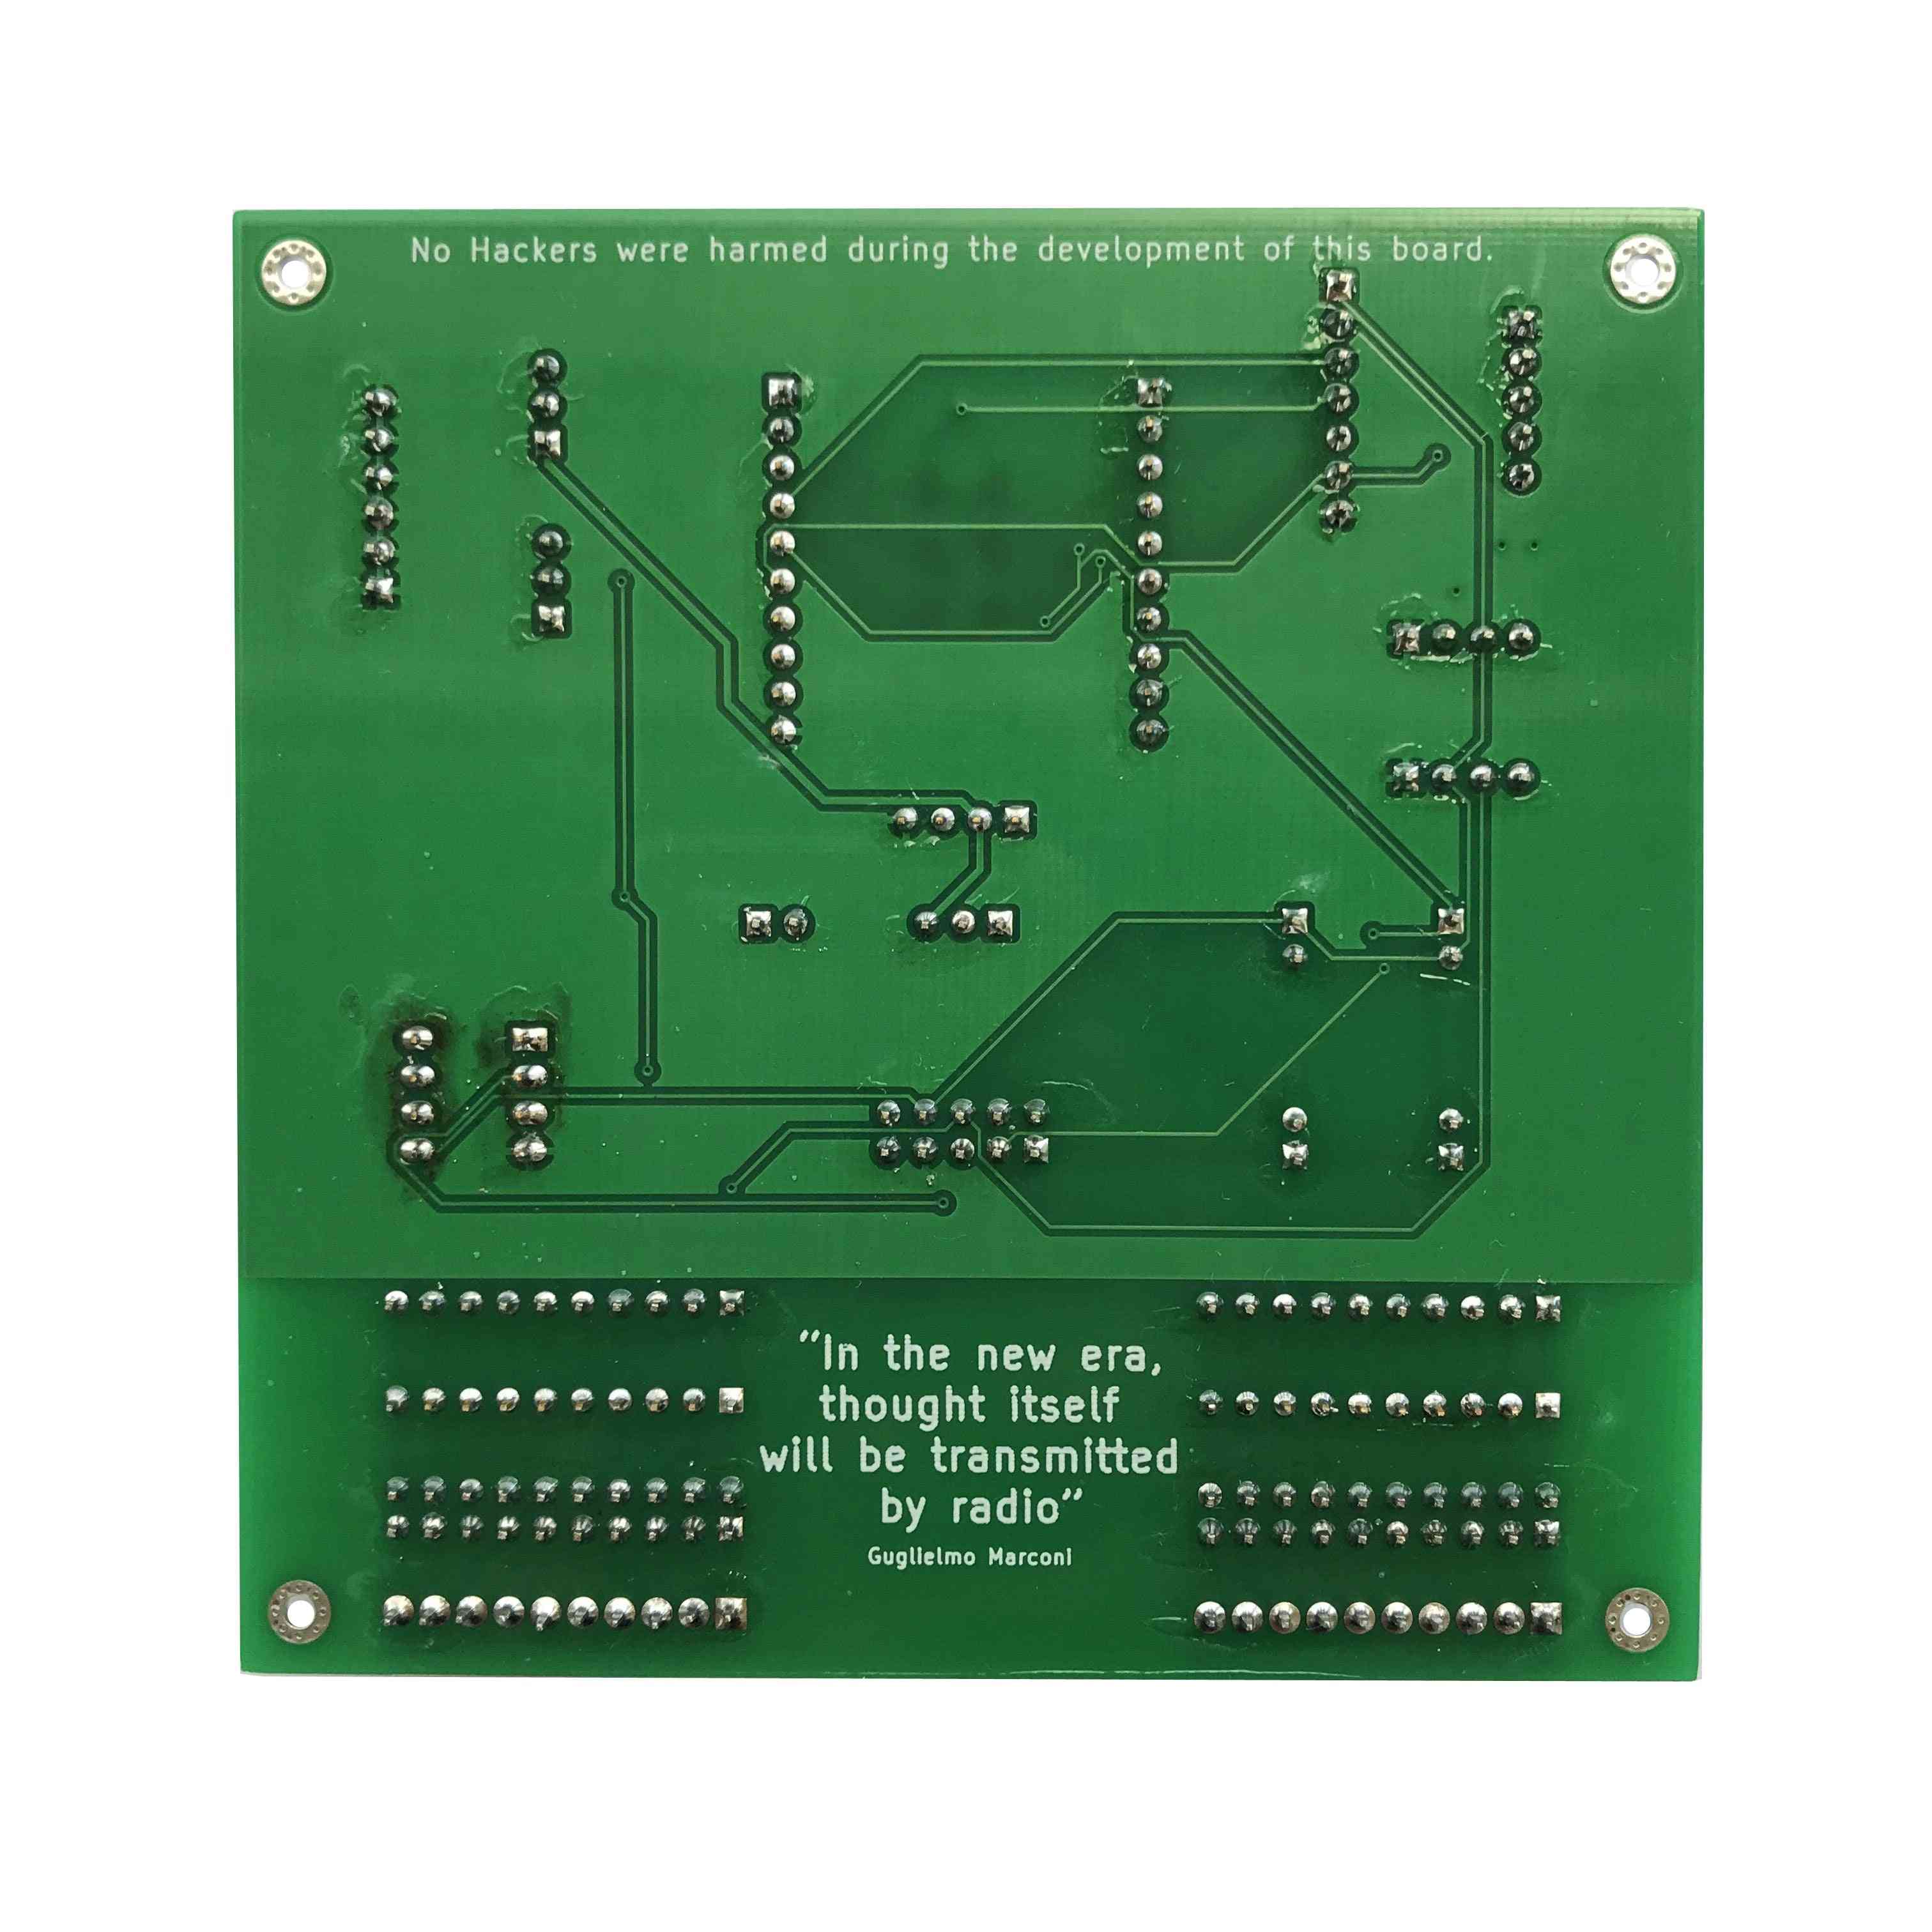 Board A Multipurpose Breakout For The Ft232h.